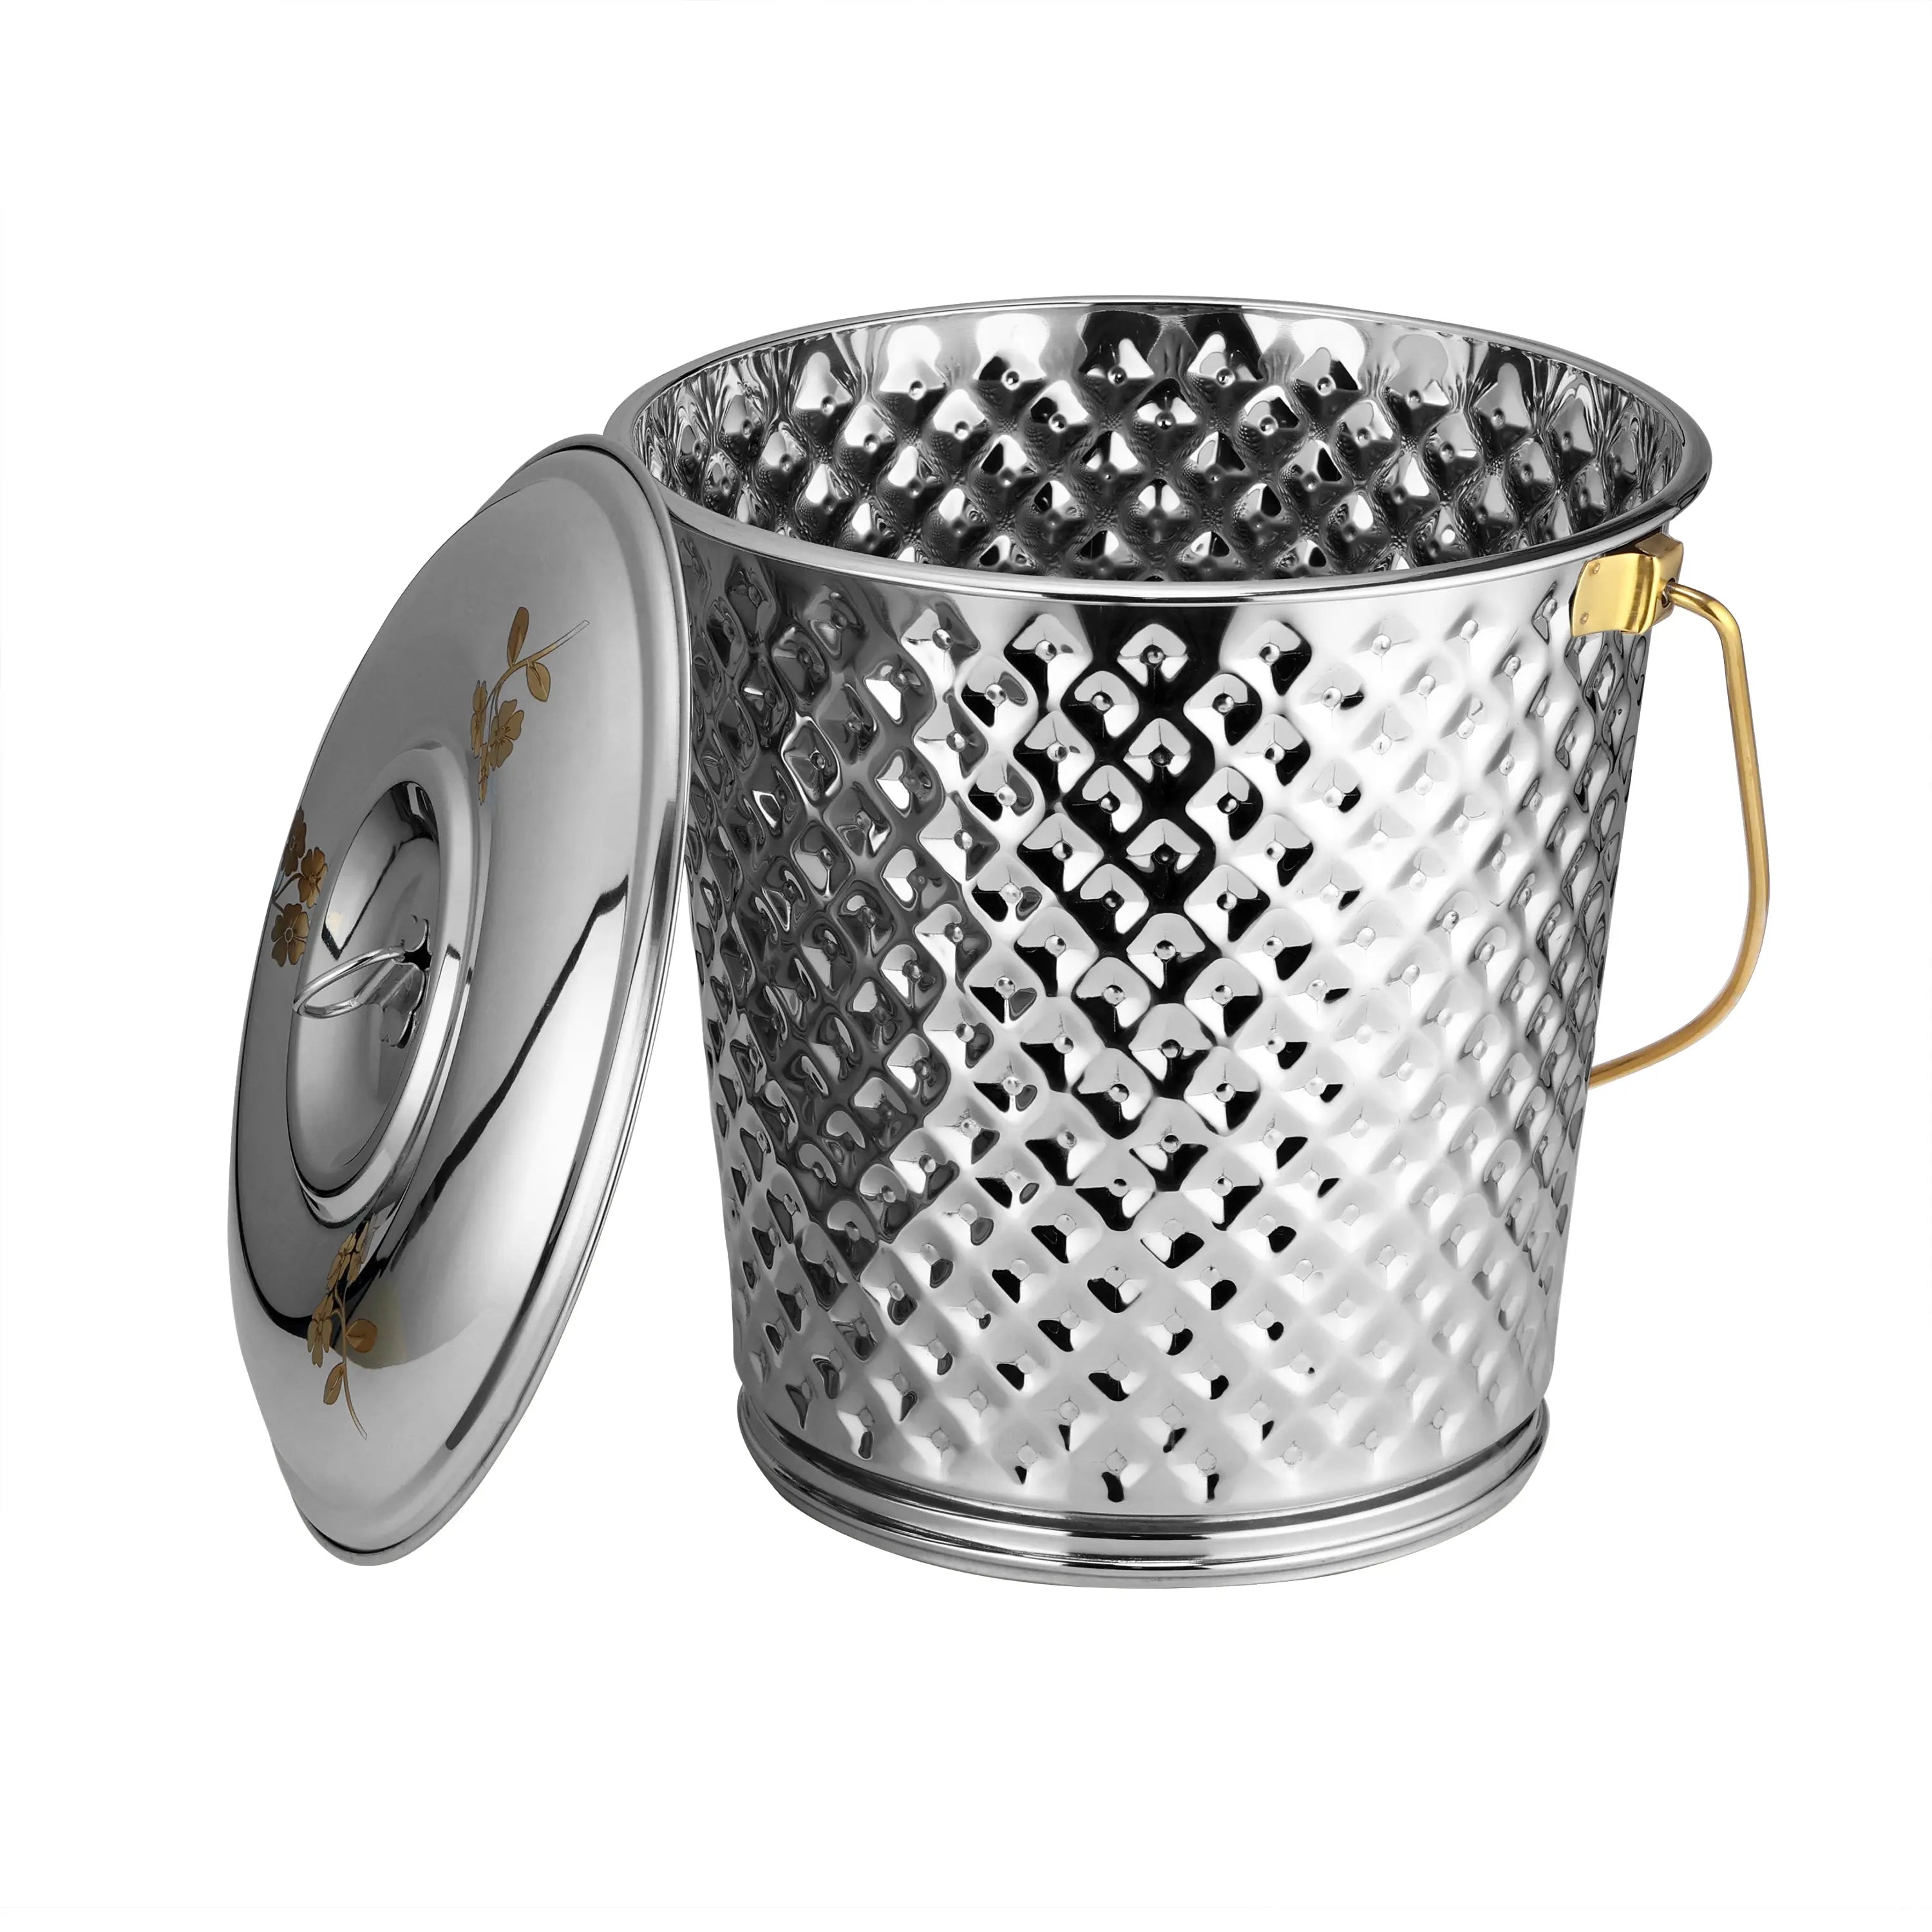 STAINLESS STEEL PVD GOLD DIAMOND BUCKET WITH LID - CROCKERY WALA AND COMPANY 